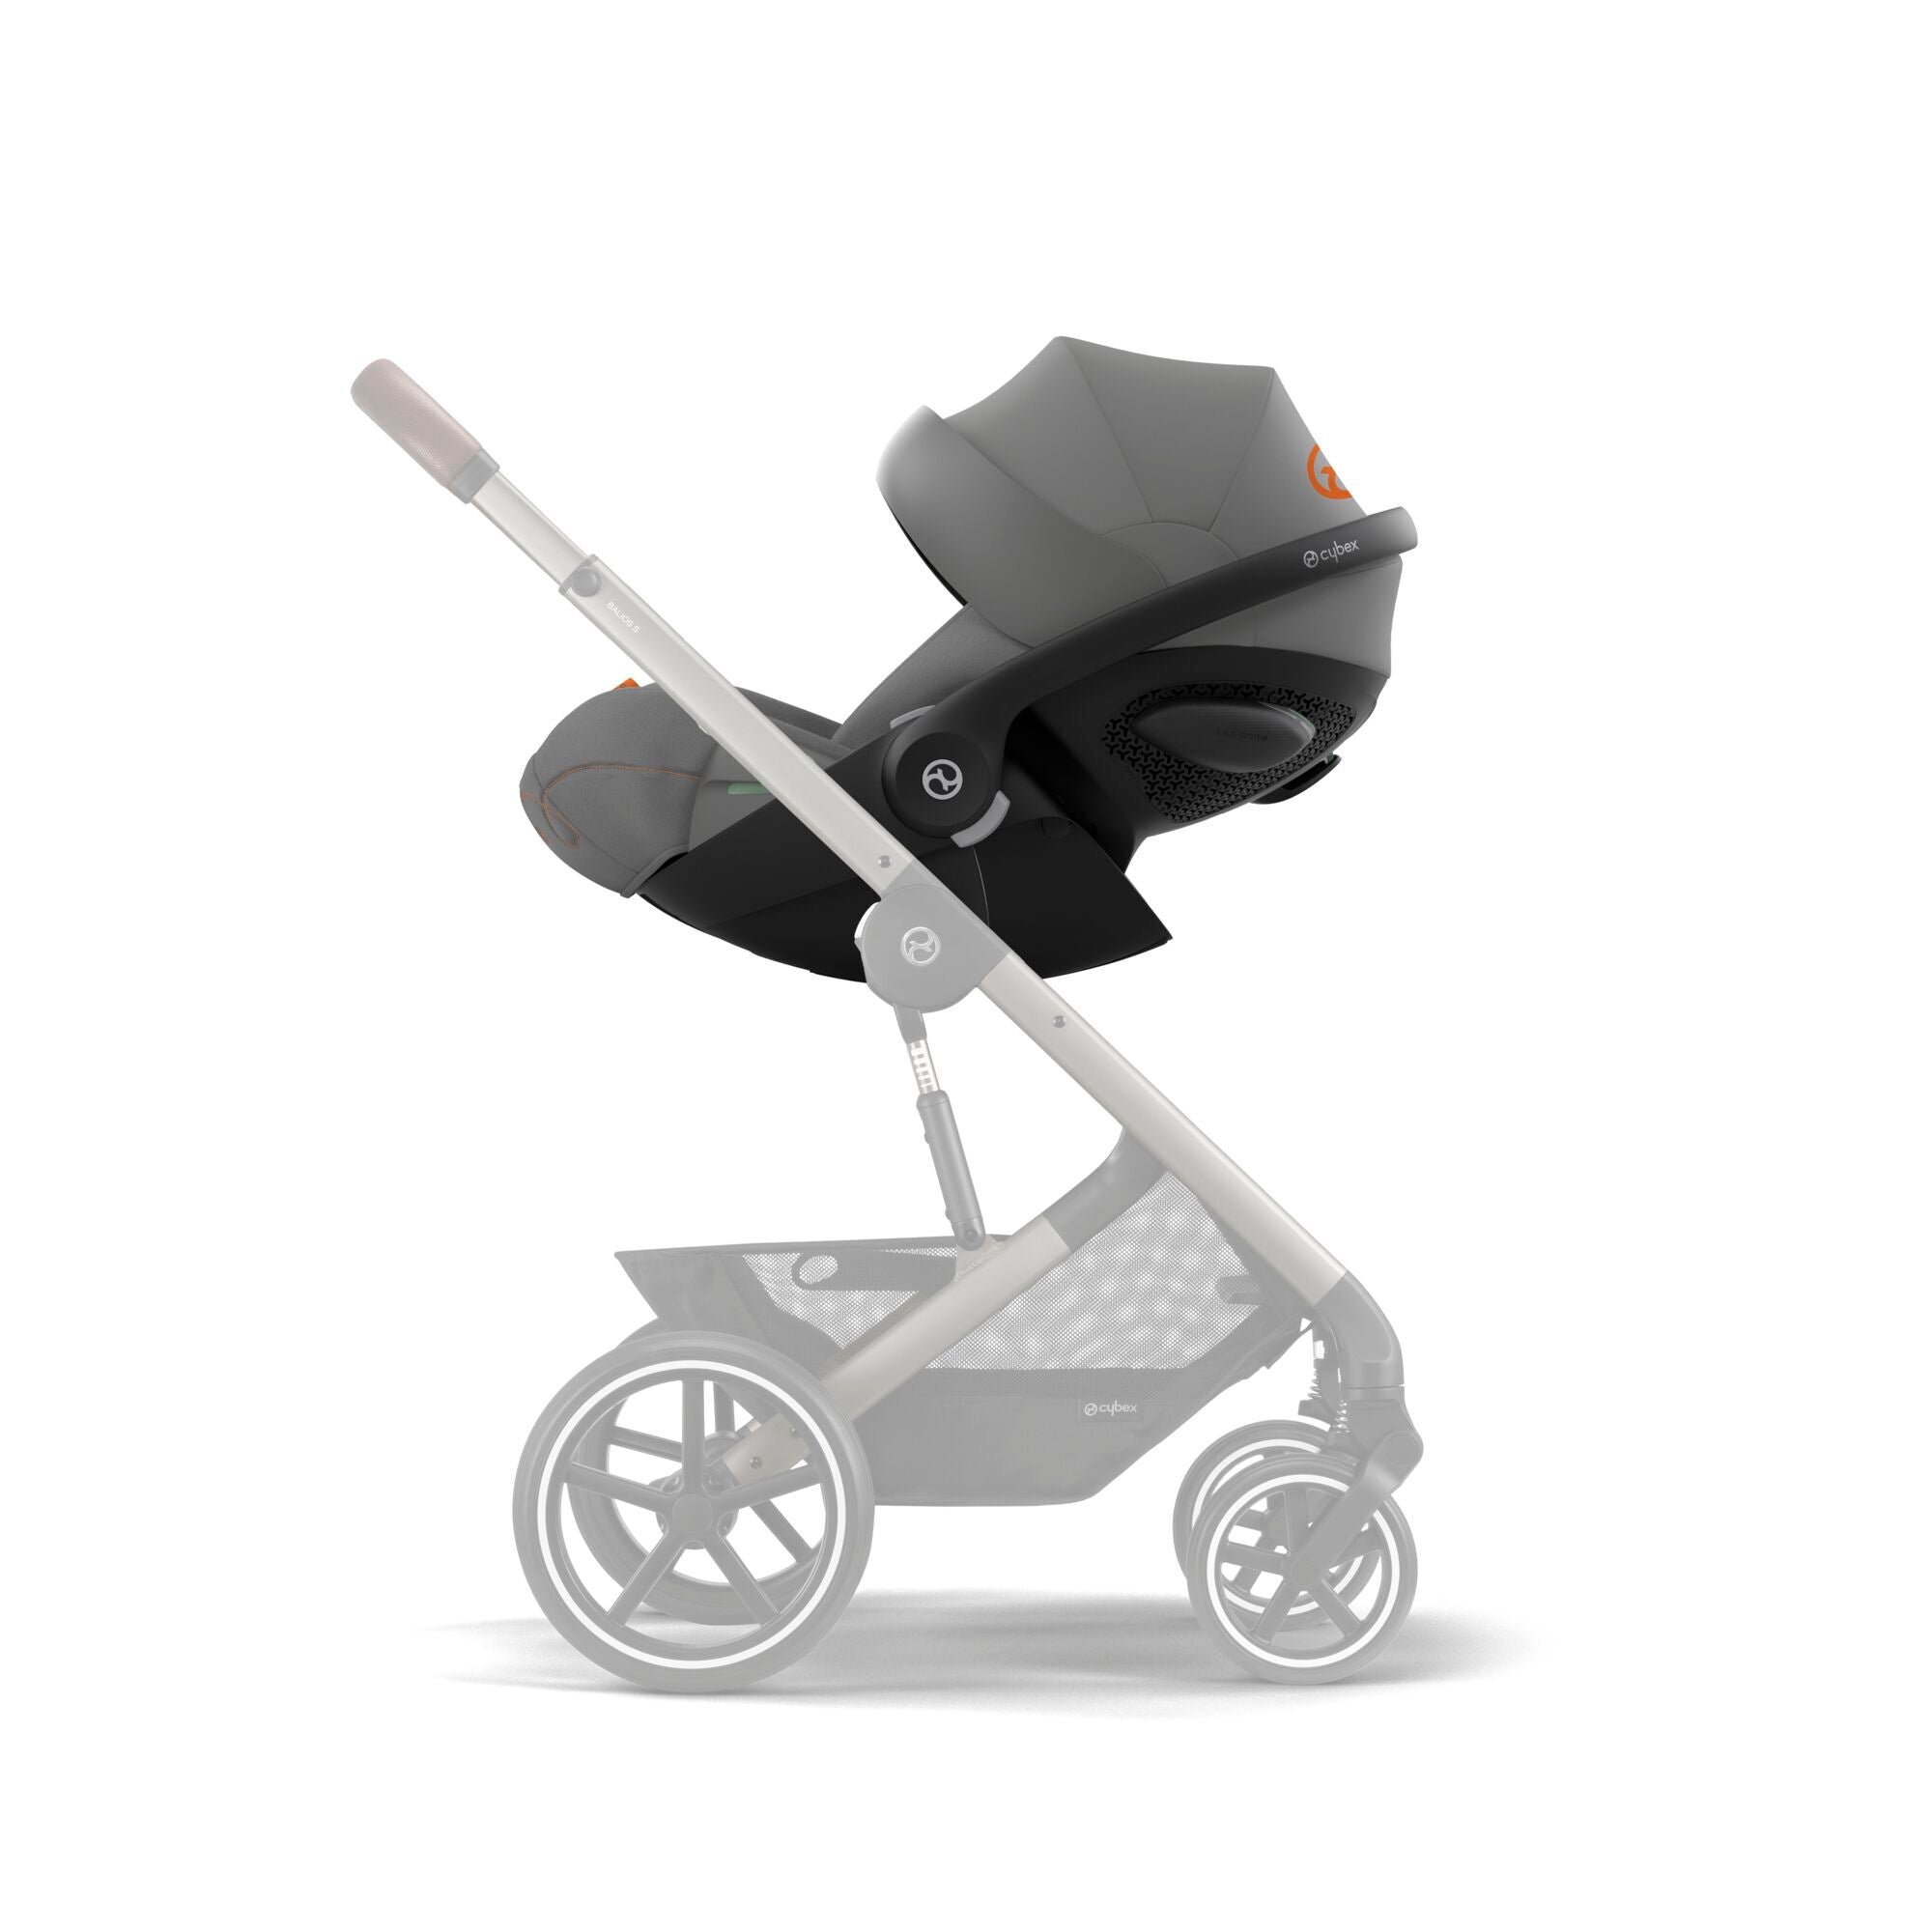 Cybex Cloud G i-Size Newborn Car Seat - Lava Grey - For Your Little One